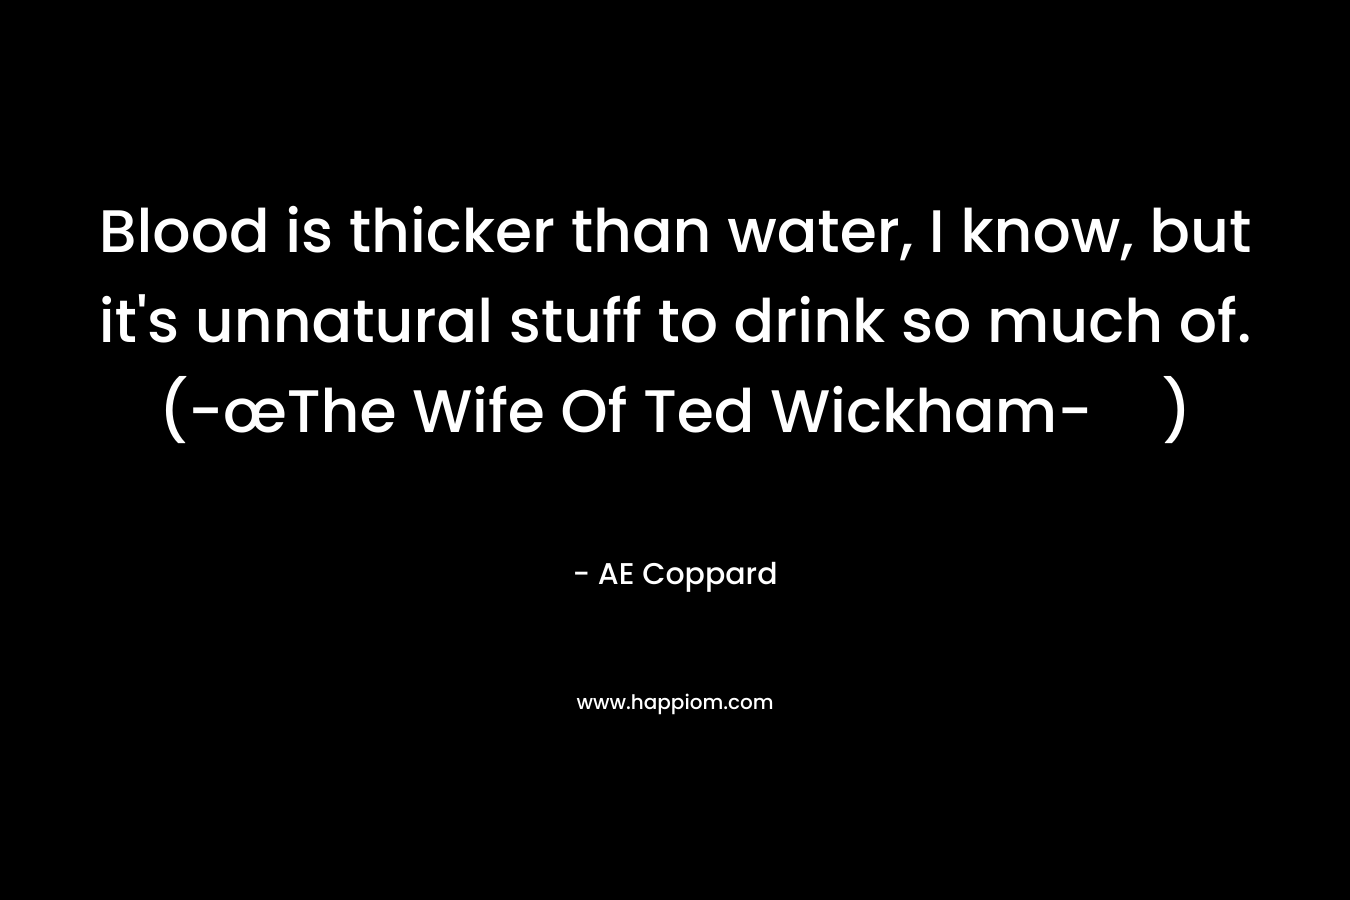 Blood is thicker than water, I know, but it's unnatural stuff to drink so much of. (-œThe Wife Of Ted Wickham-)